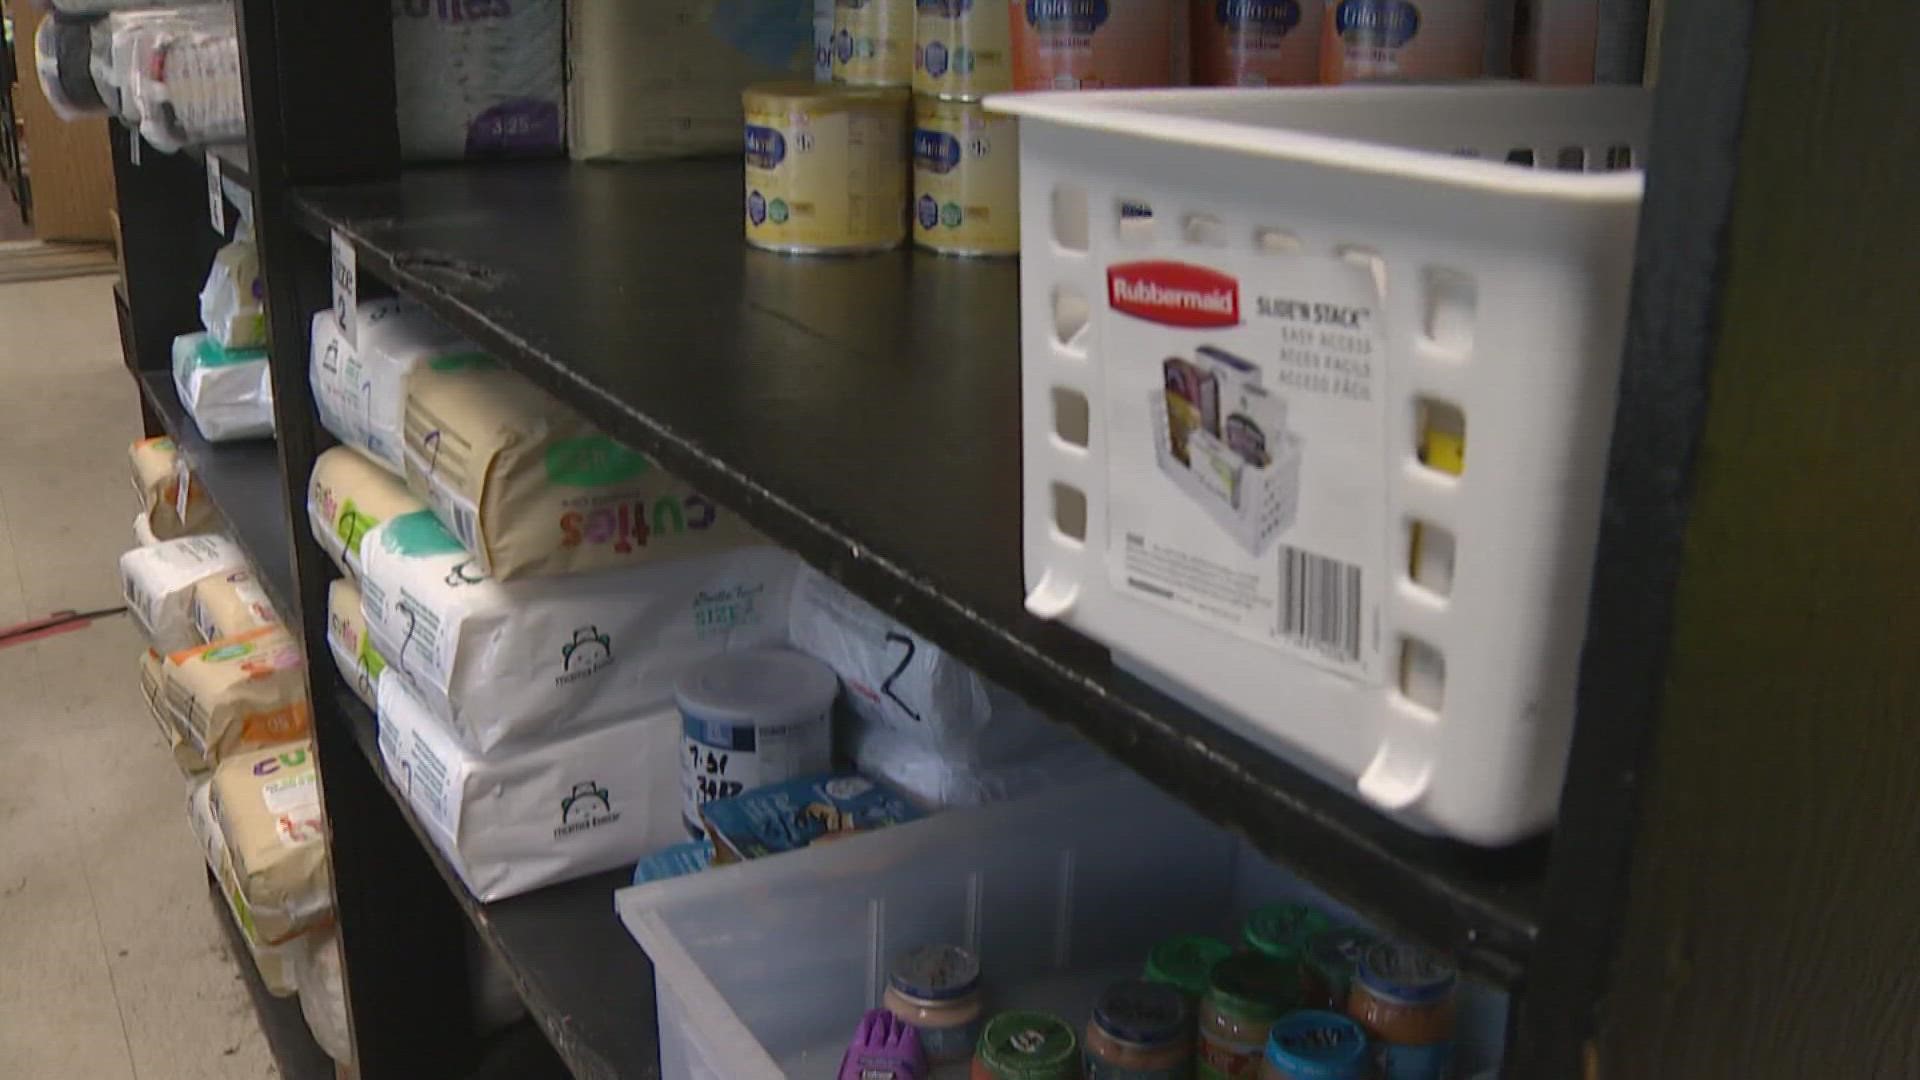 The White Center Food Bank had to toss 1,000 pounds of formula due to a recall. Replacing the supply has been a significant challenge.